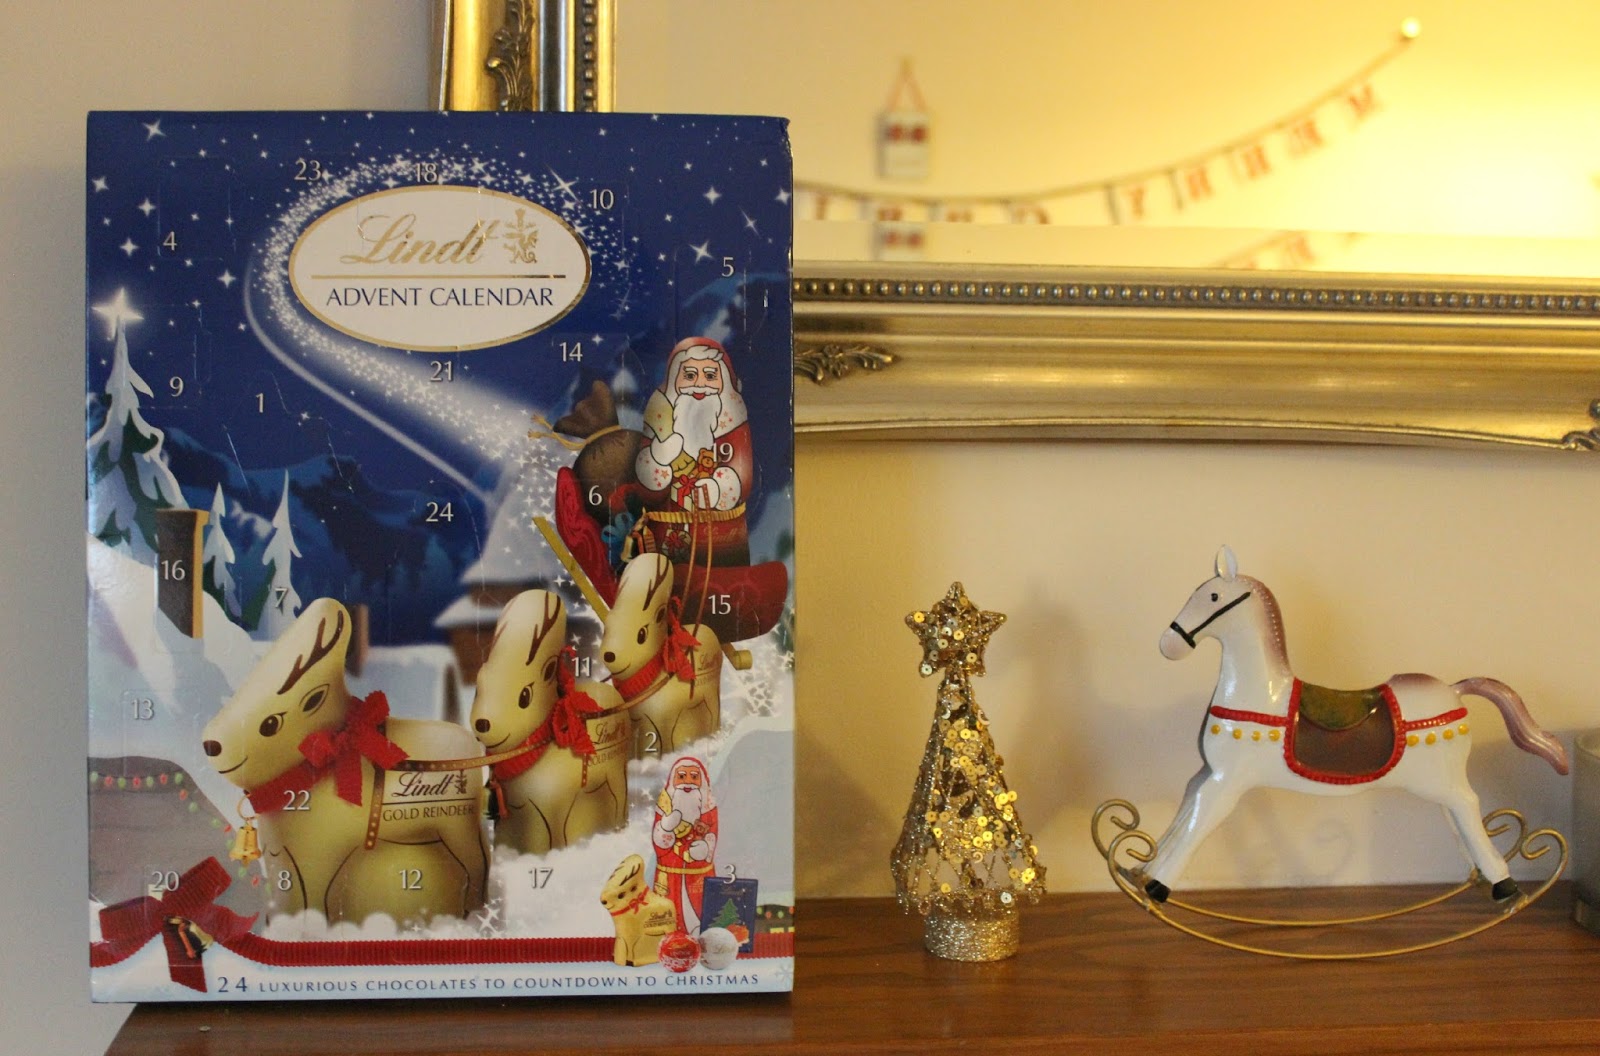 A picture of the Lindt Advent Calendar